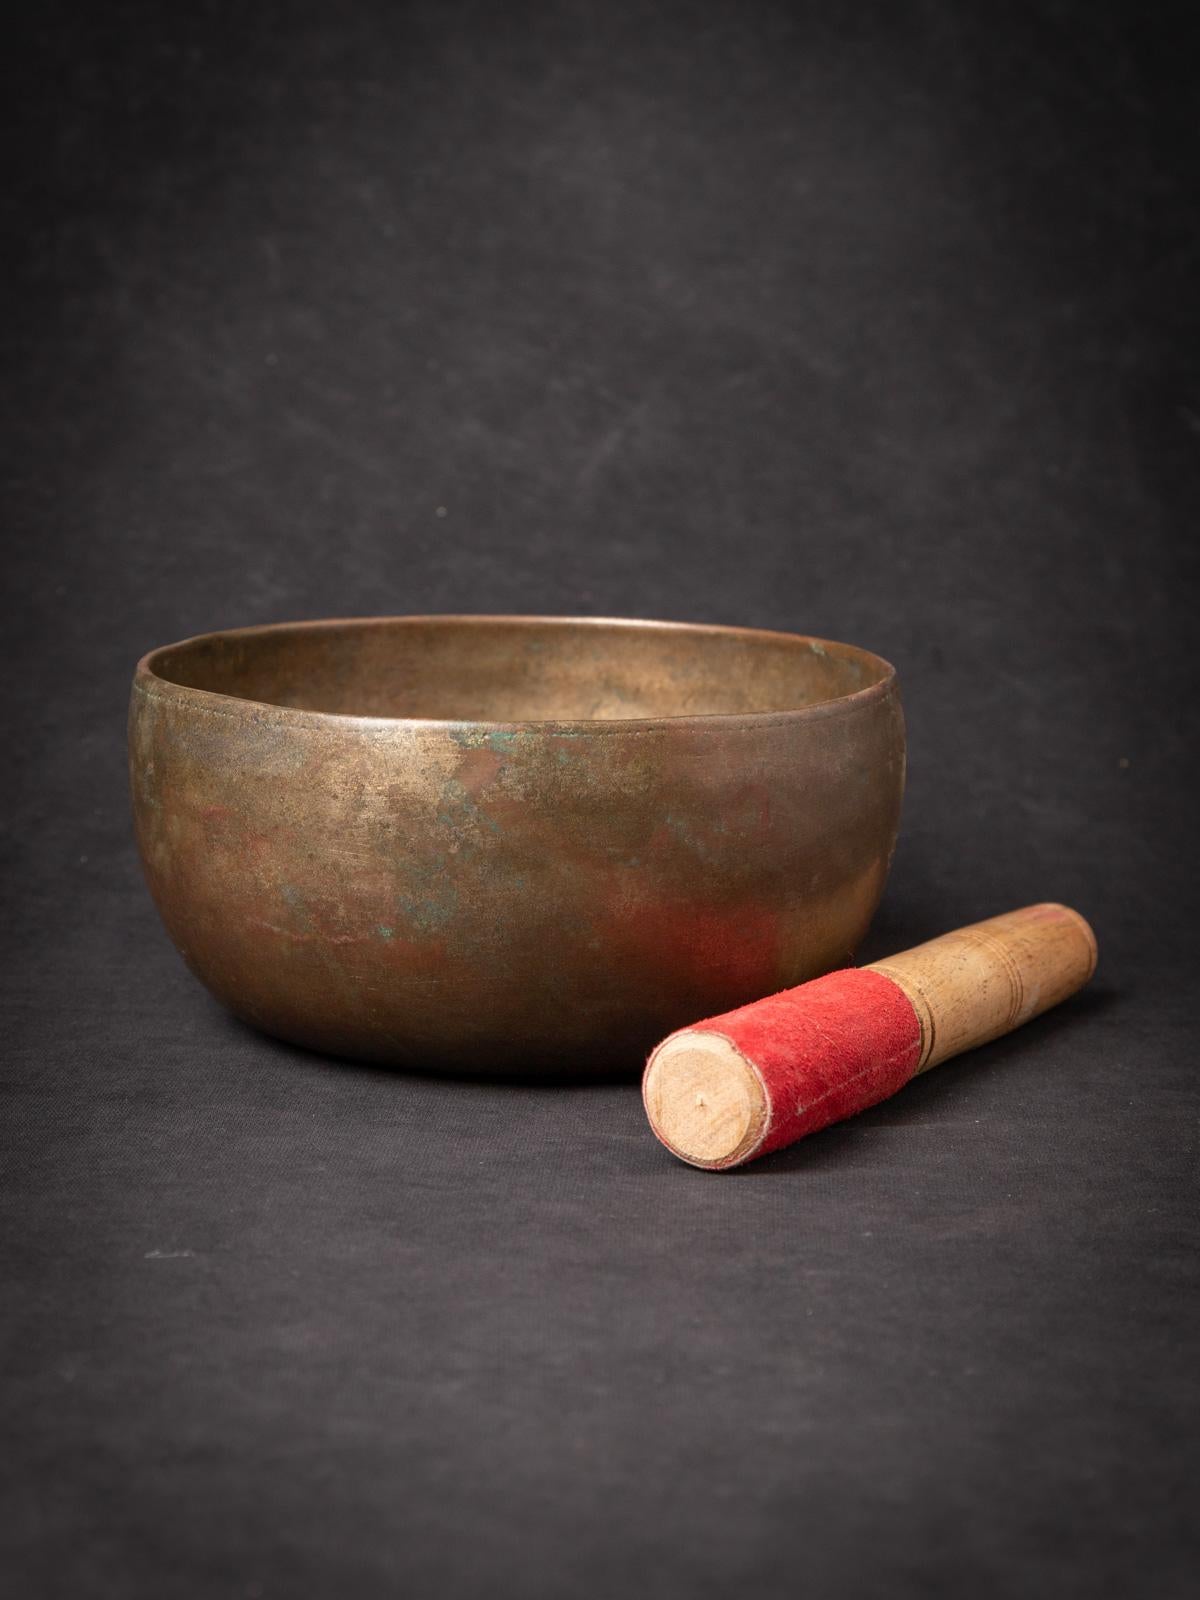 Discover the enchanting tones and meditative vibrations of this Old Bronze Nepali Singing Bowl. Crafted from bronze, this exquisite bowl stands at 8.6 cm in height with a diameter of 18 cm. Its age lends it a unique character, dating back to the